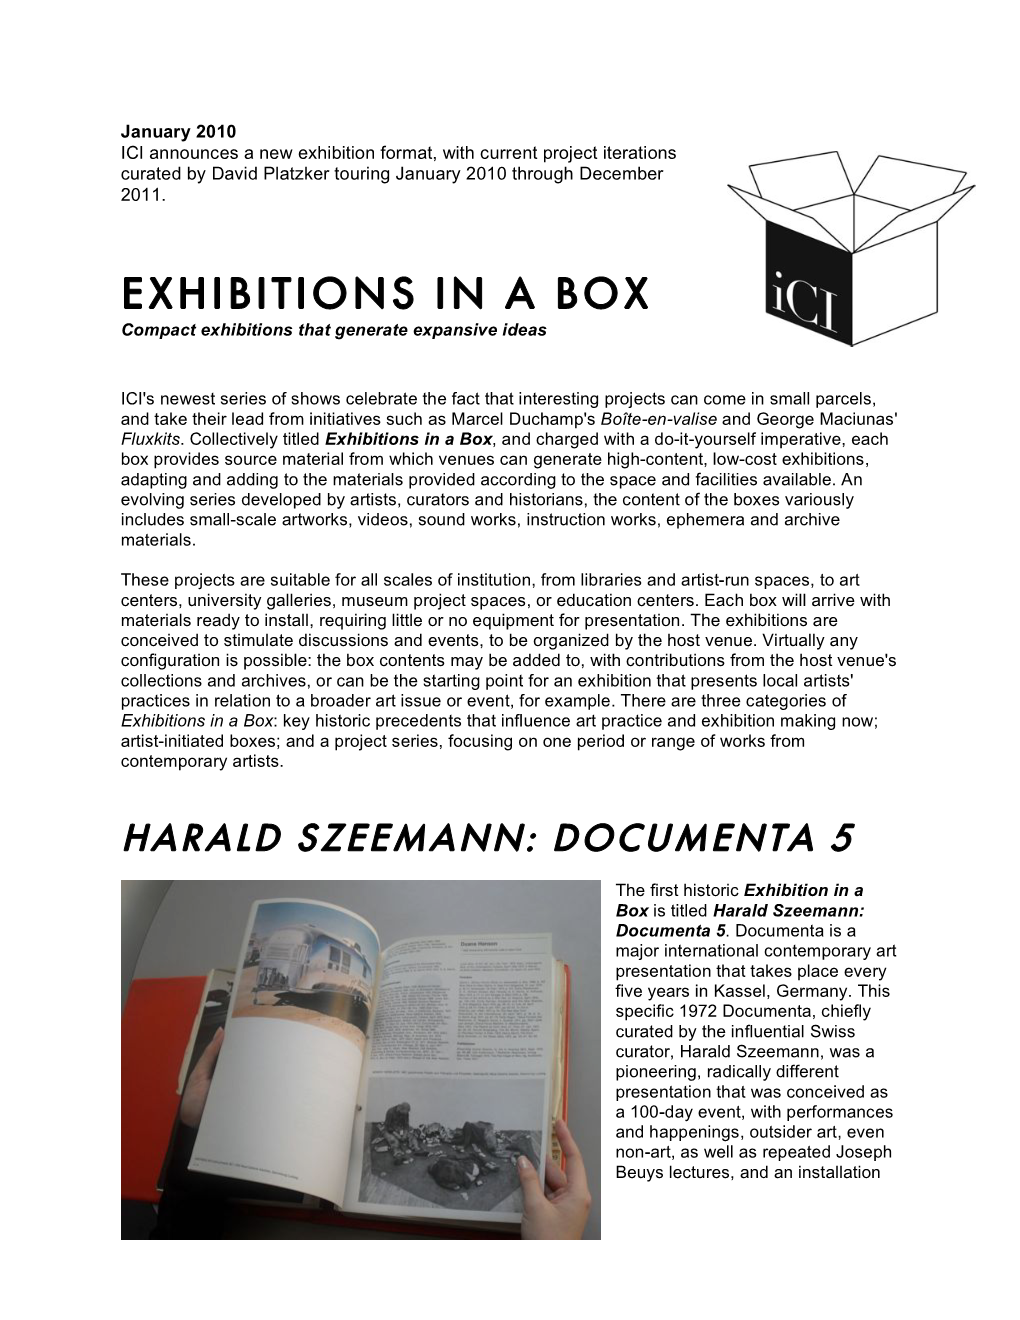 Exhibitions in a Box PD